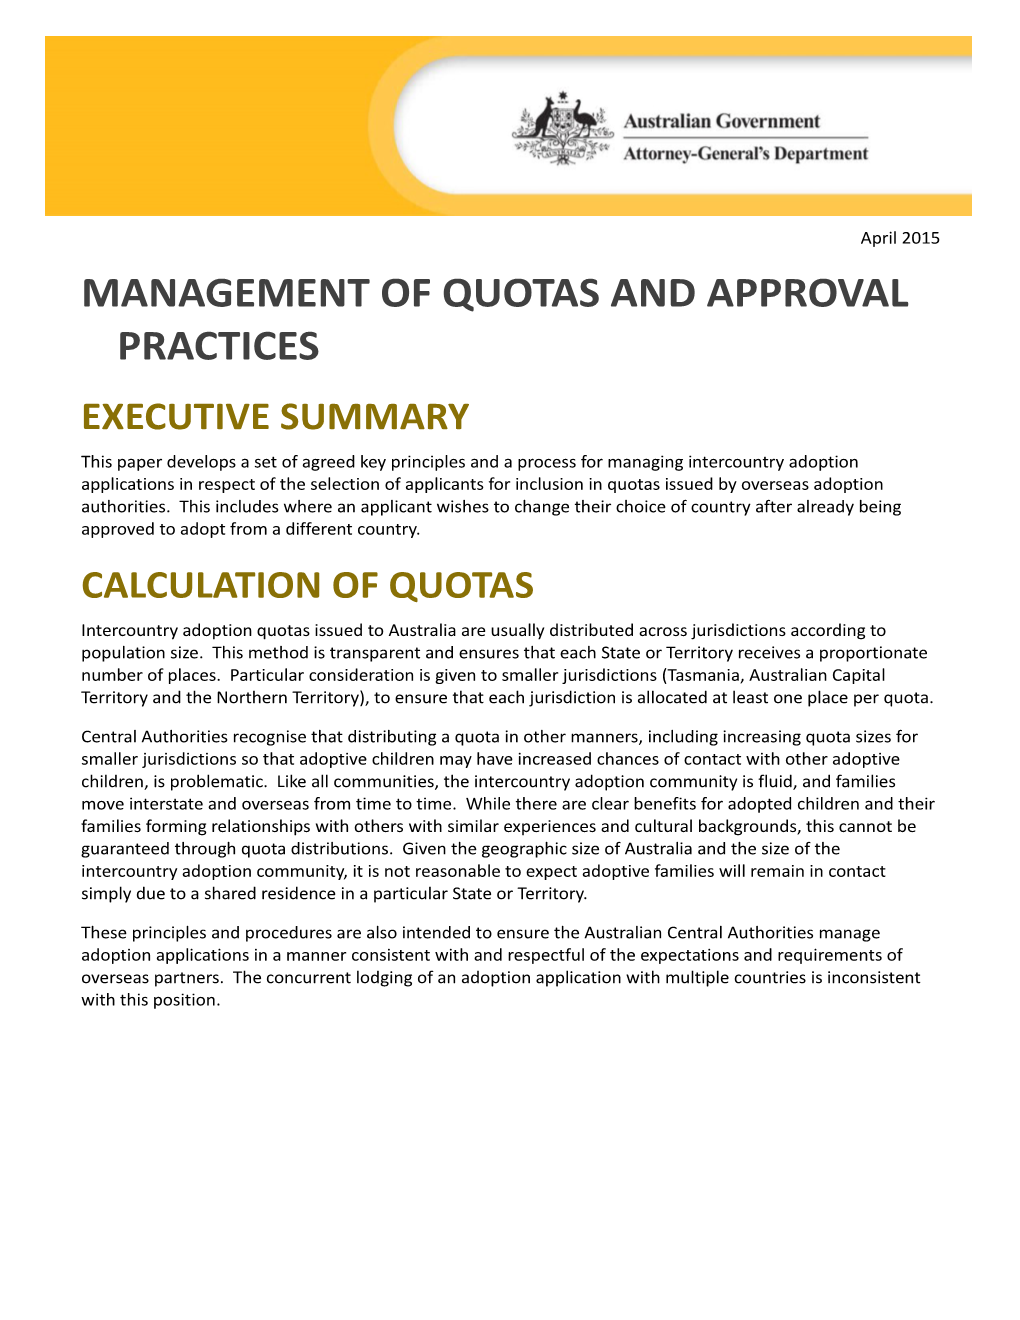 Management of Quotas and Approval Practices